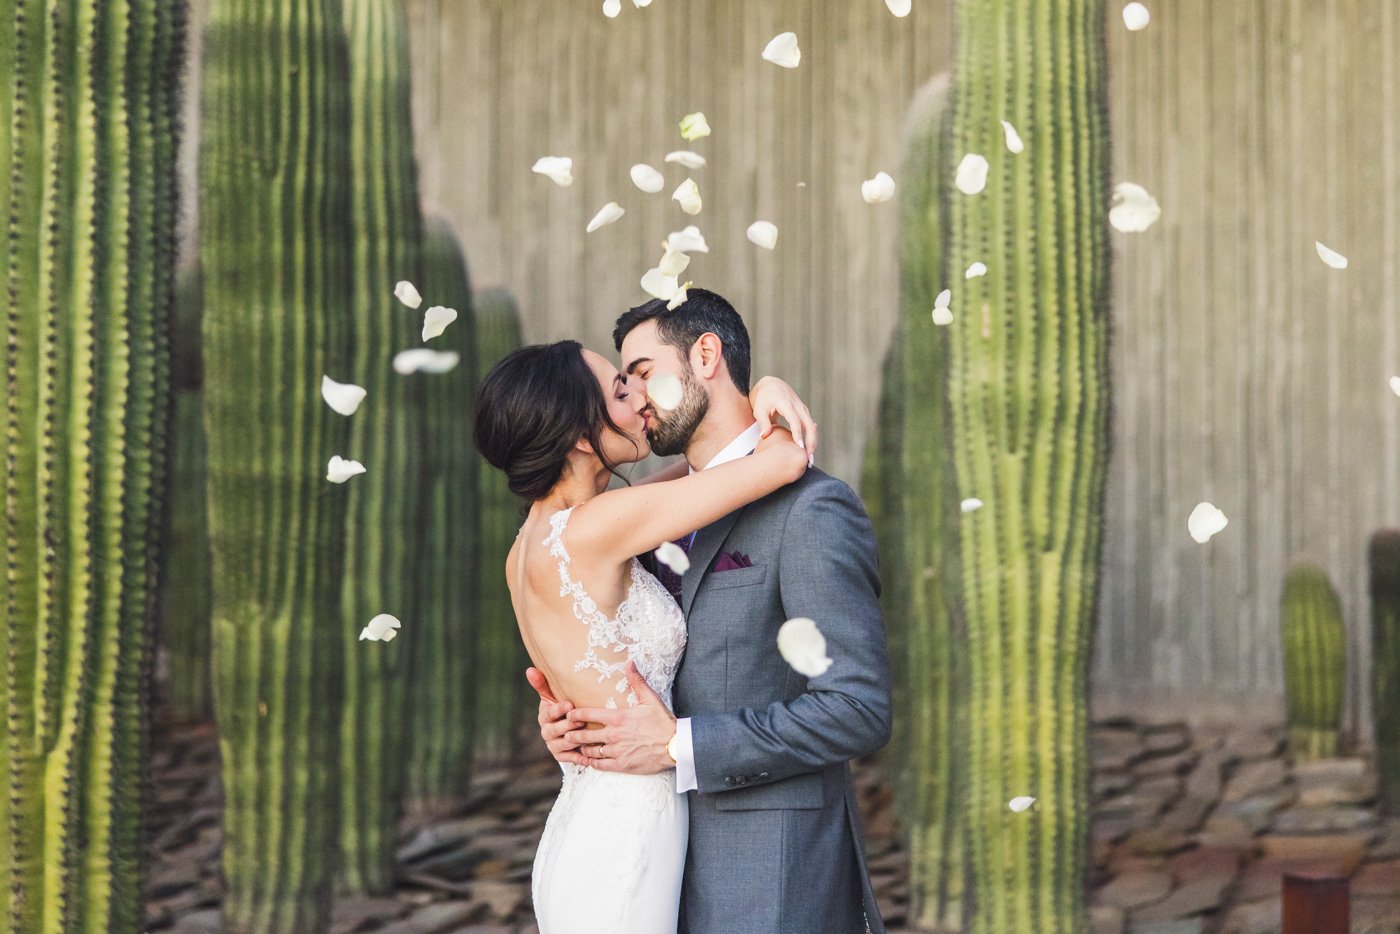 flower petals tossed in air in front of bride and groom kissing by cactus